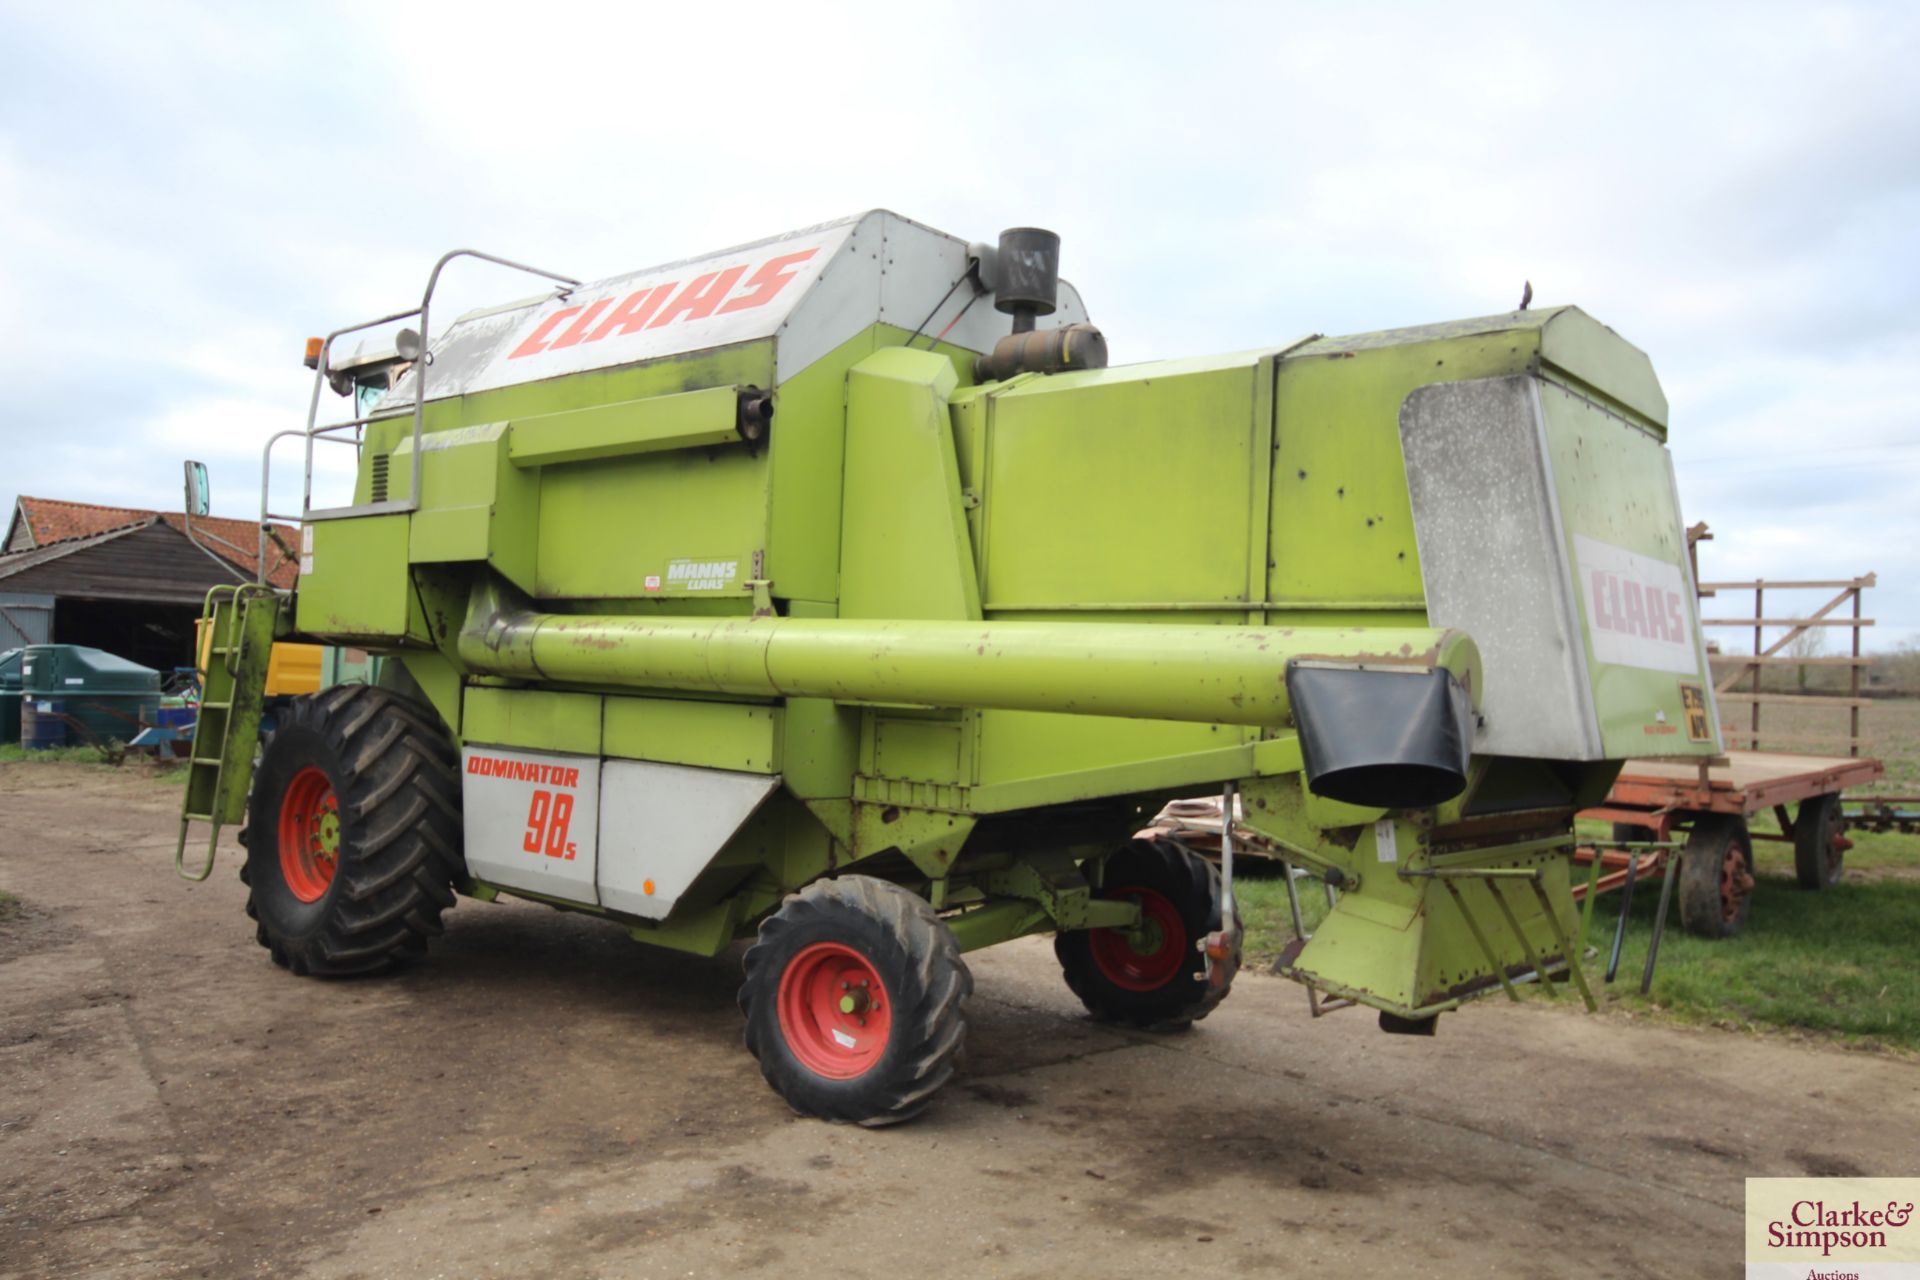 ** UPDATED HOURS ** Claas Dominator 98S combine. Registration E799 APU. Date of first registration - Image 3 of 120